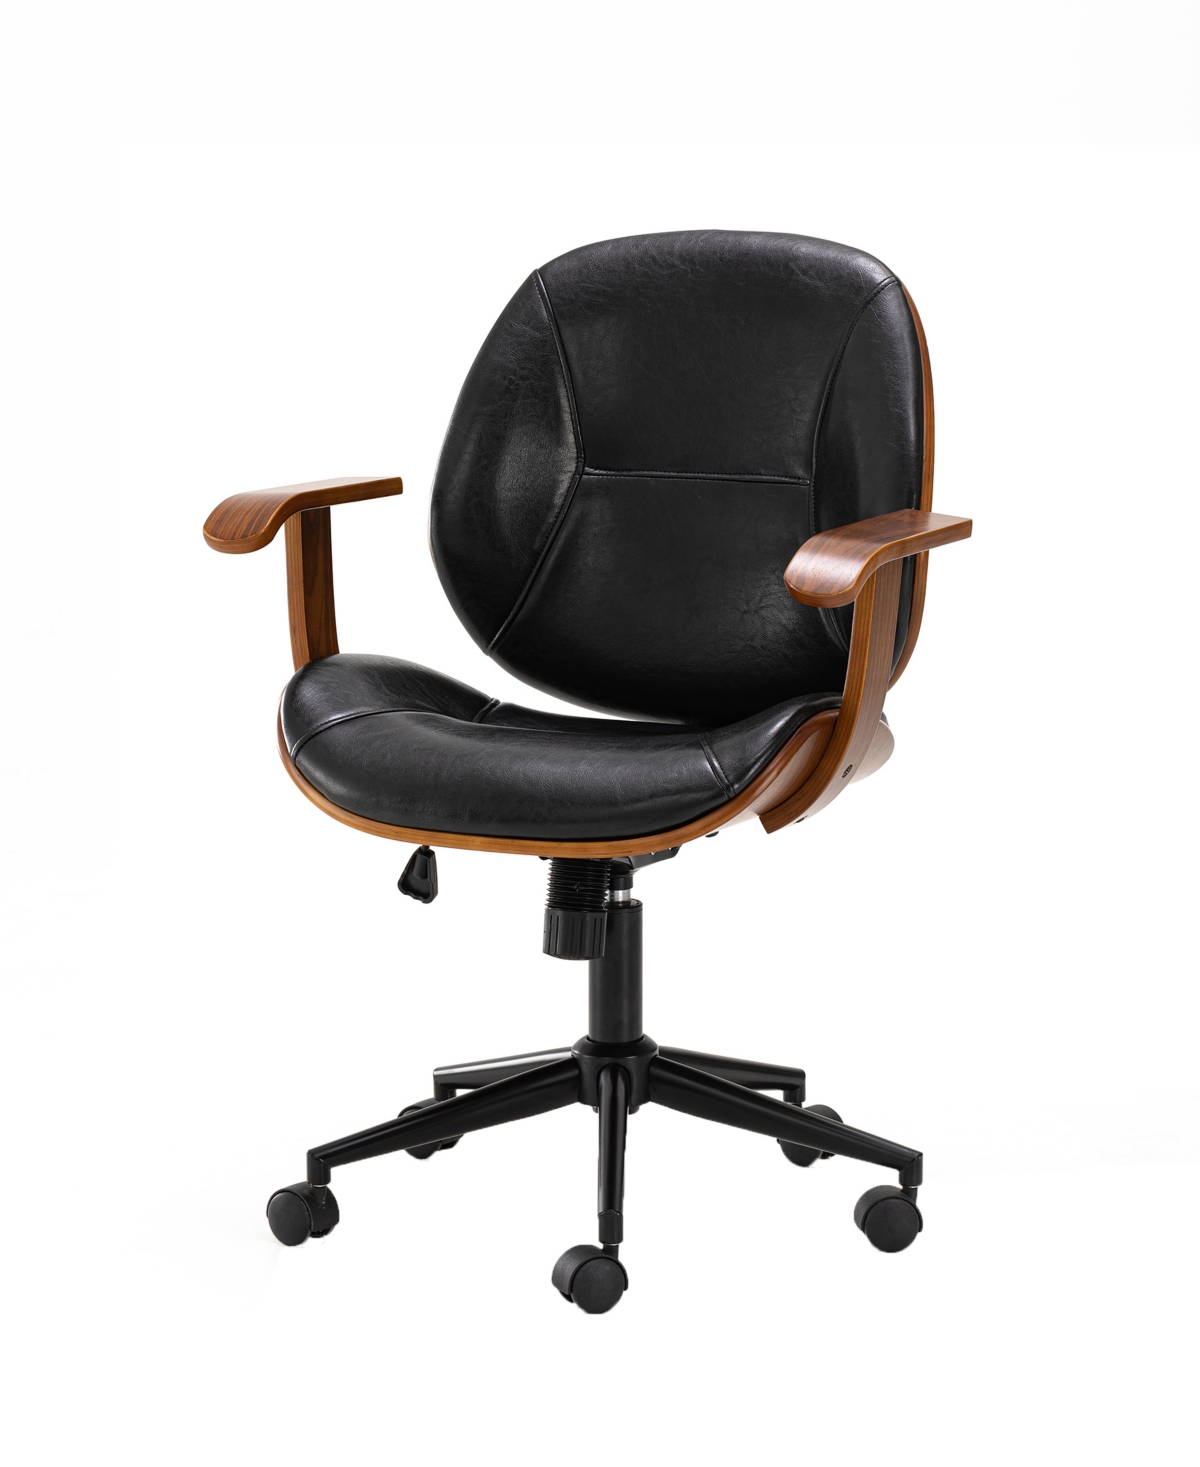 Glitzhome Leatherette Gaslift Adjustable Swivel Office Chair In Black